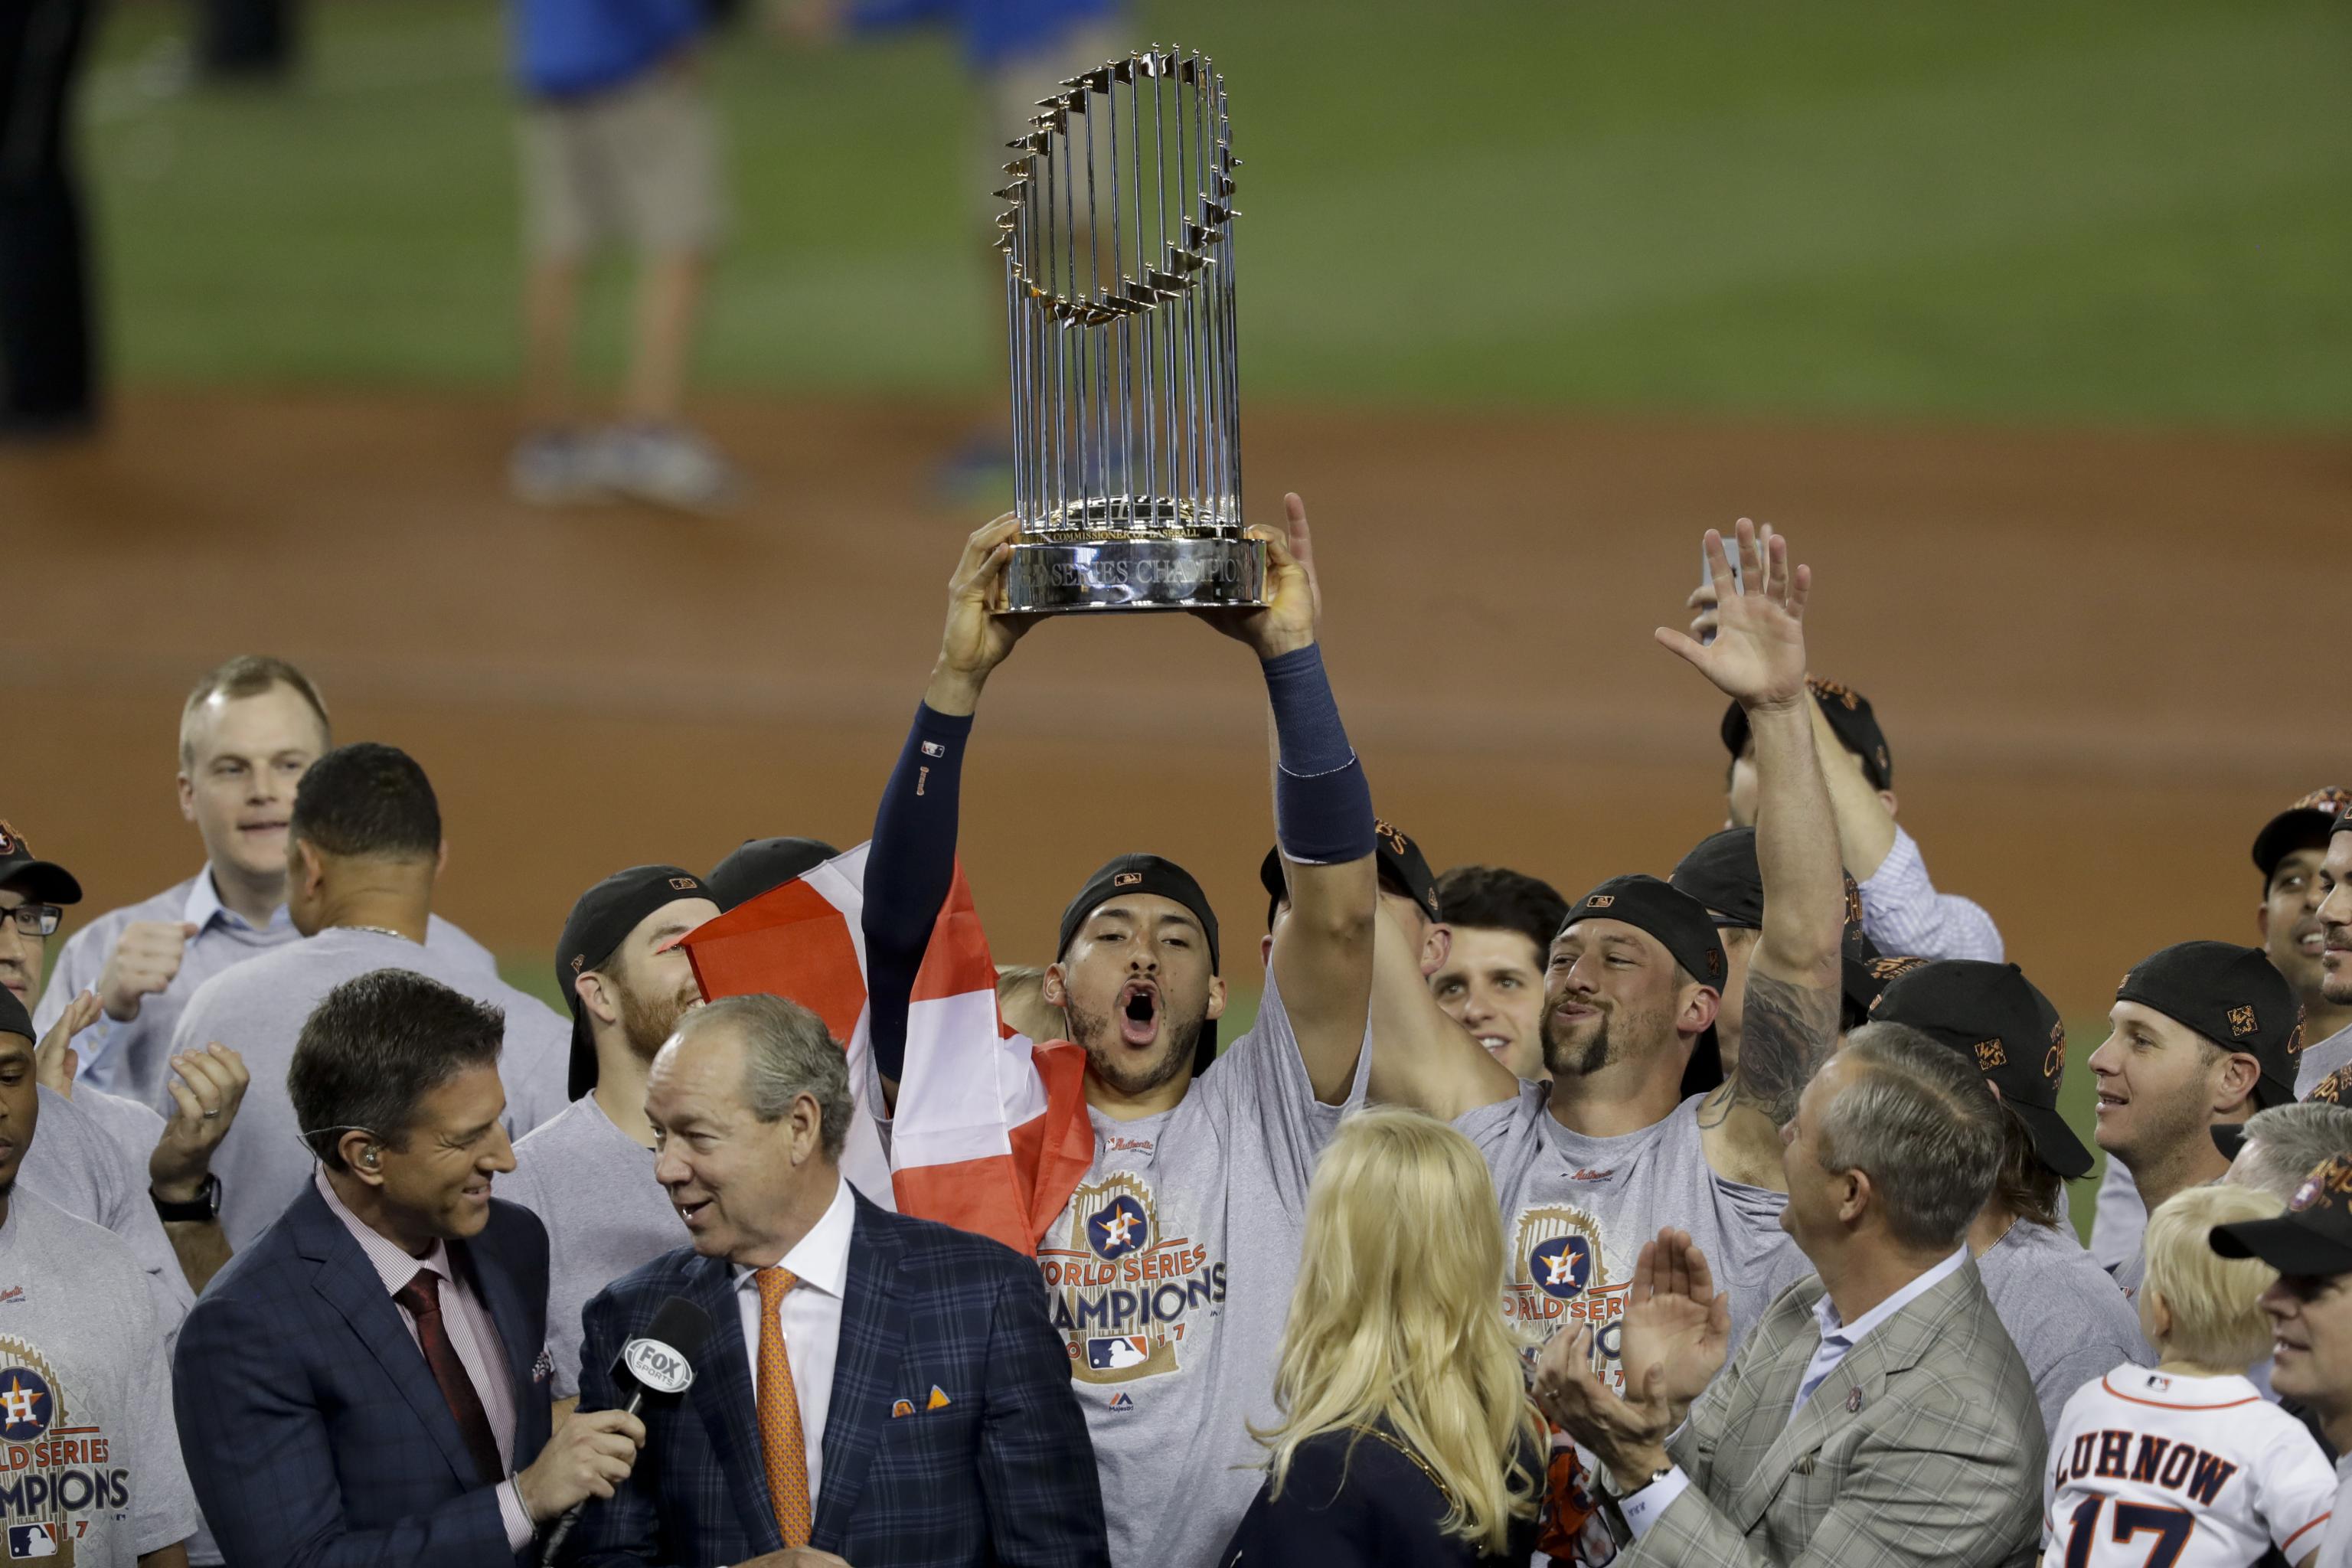 Astros Parade 2017: Celebration Schedule, Route and Players to Watch, News, Scores, Highlights, Stats, and Rumors